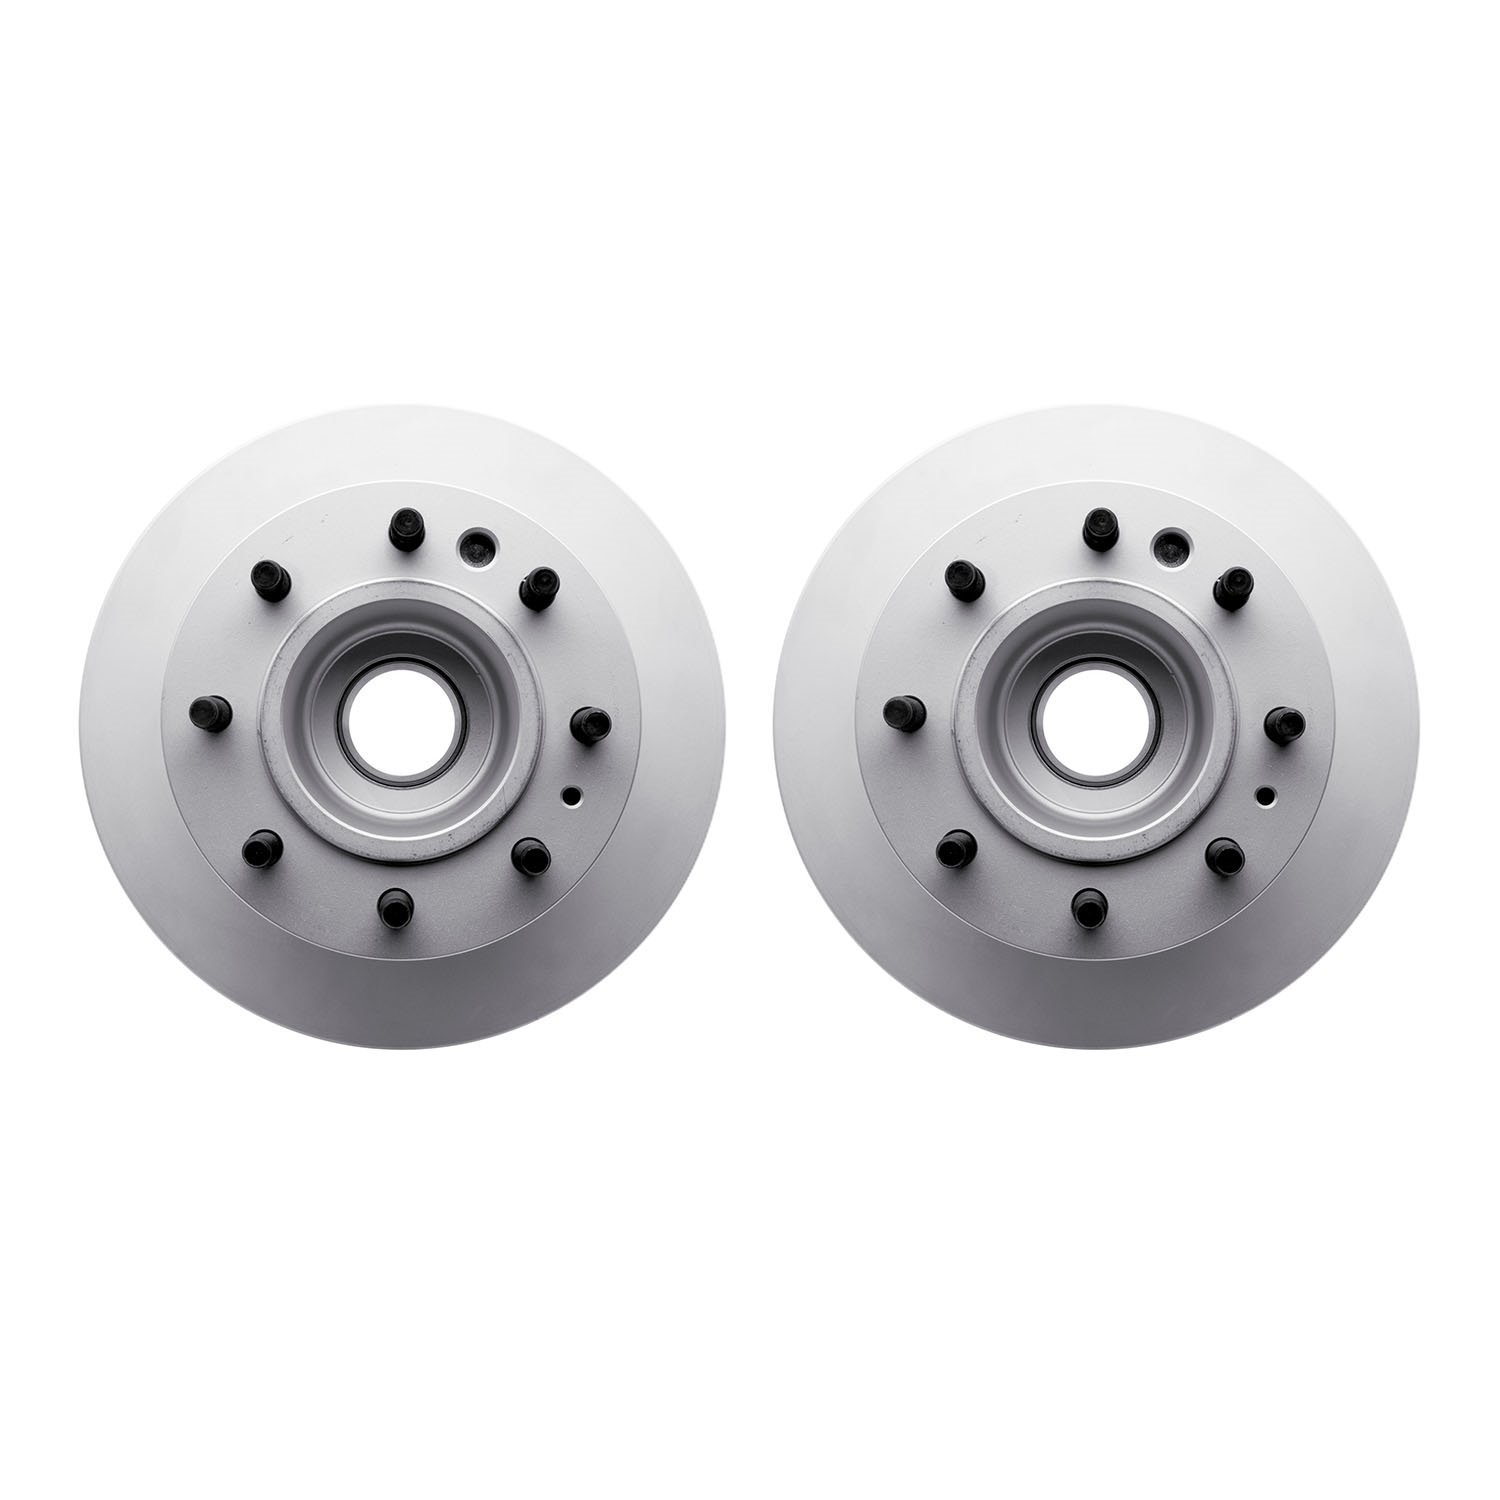 4002-54130 Geospec Brake Rotors, Fits Select Ford/Lincoln/Mercury/Mazda, Position: Front